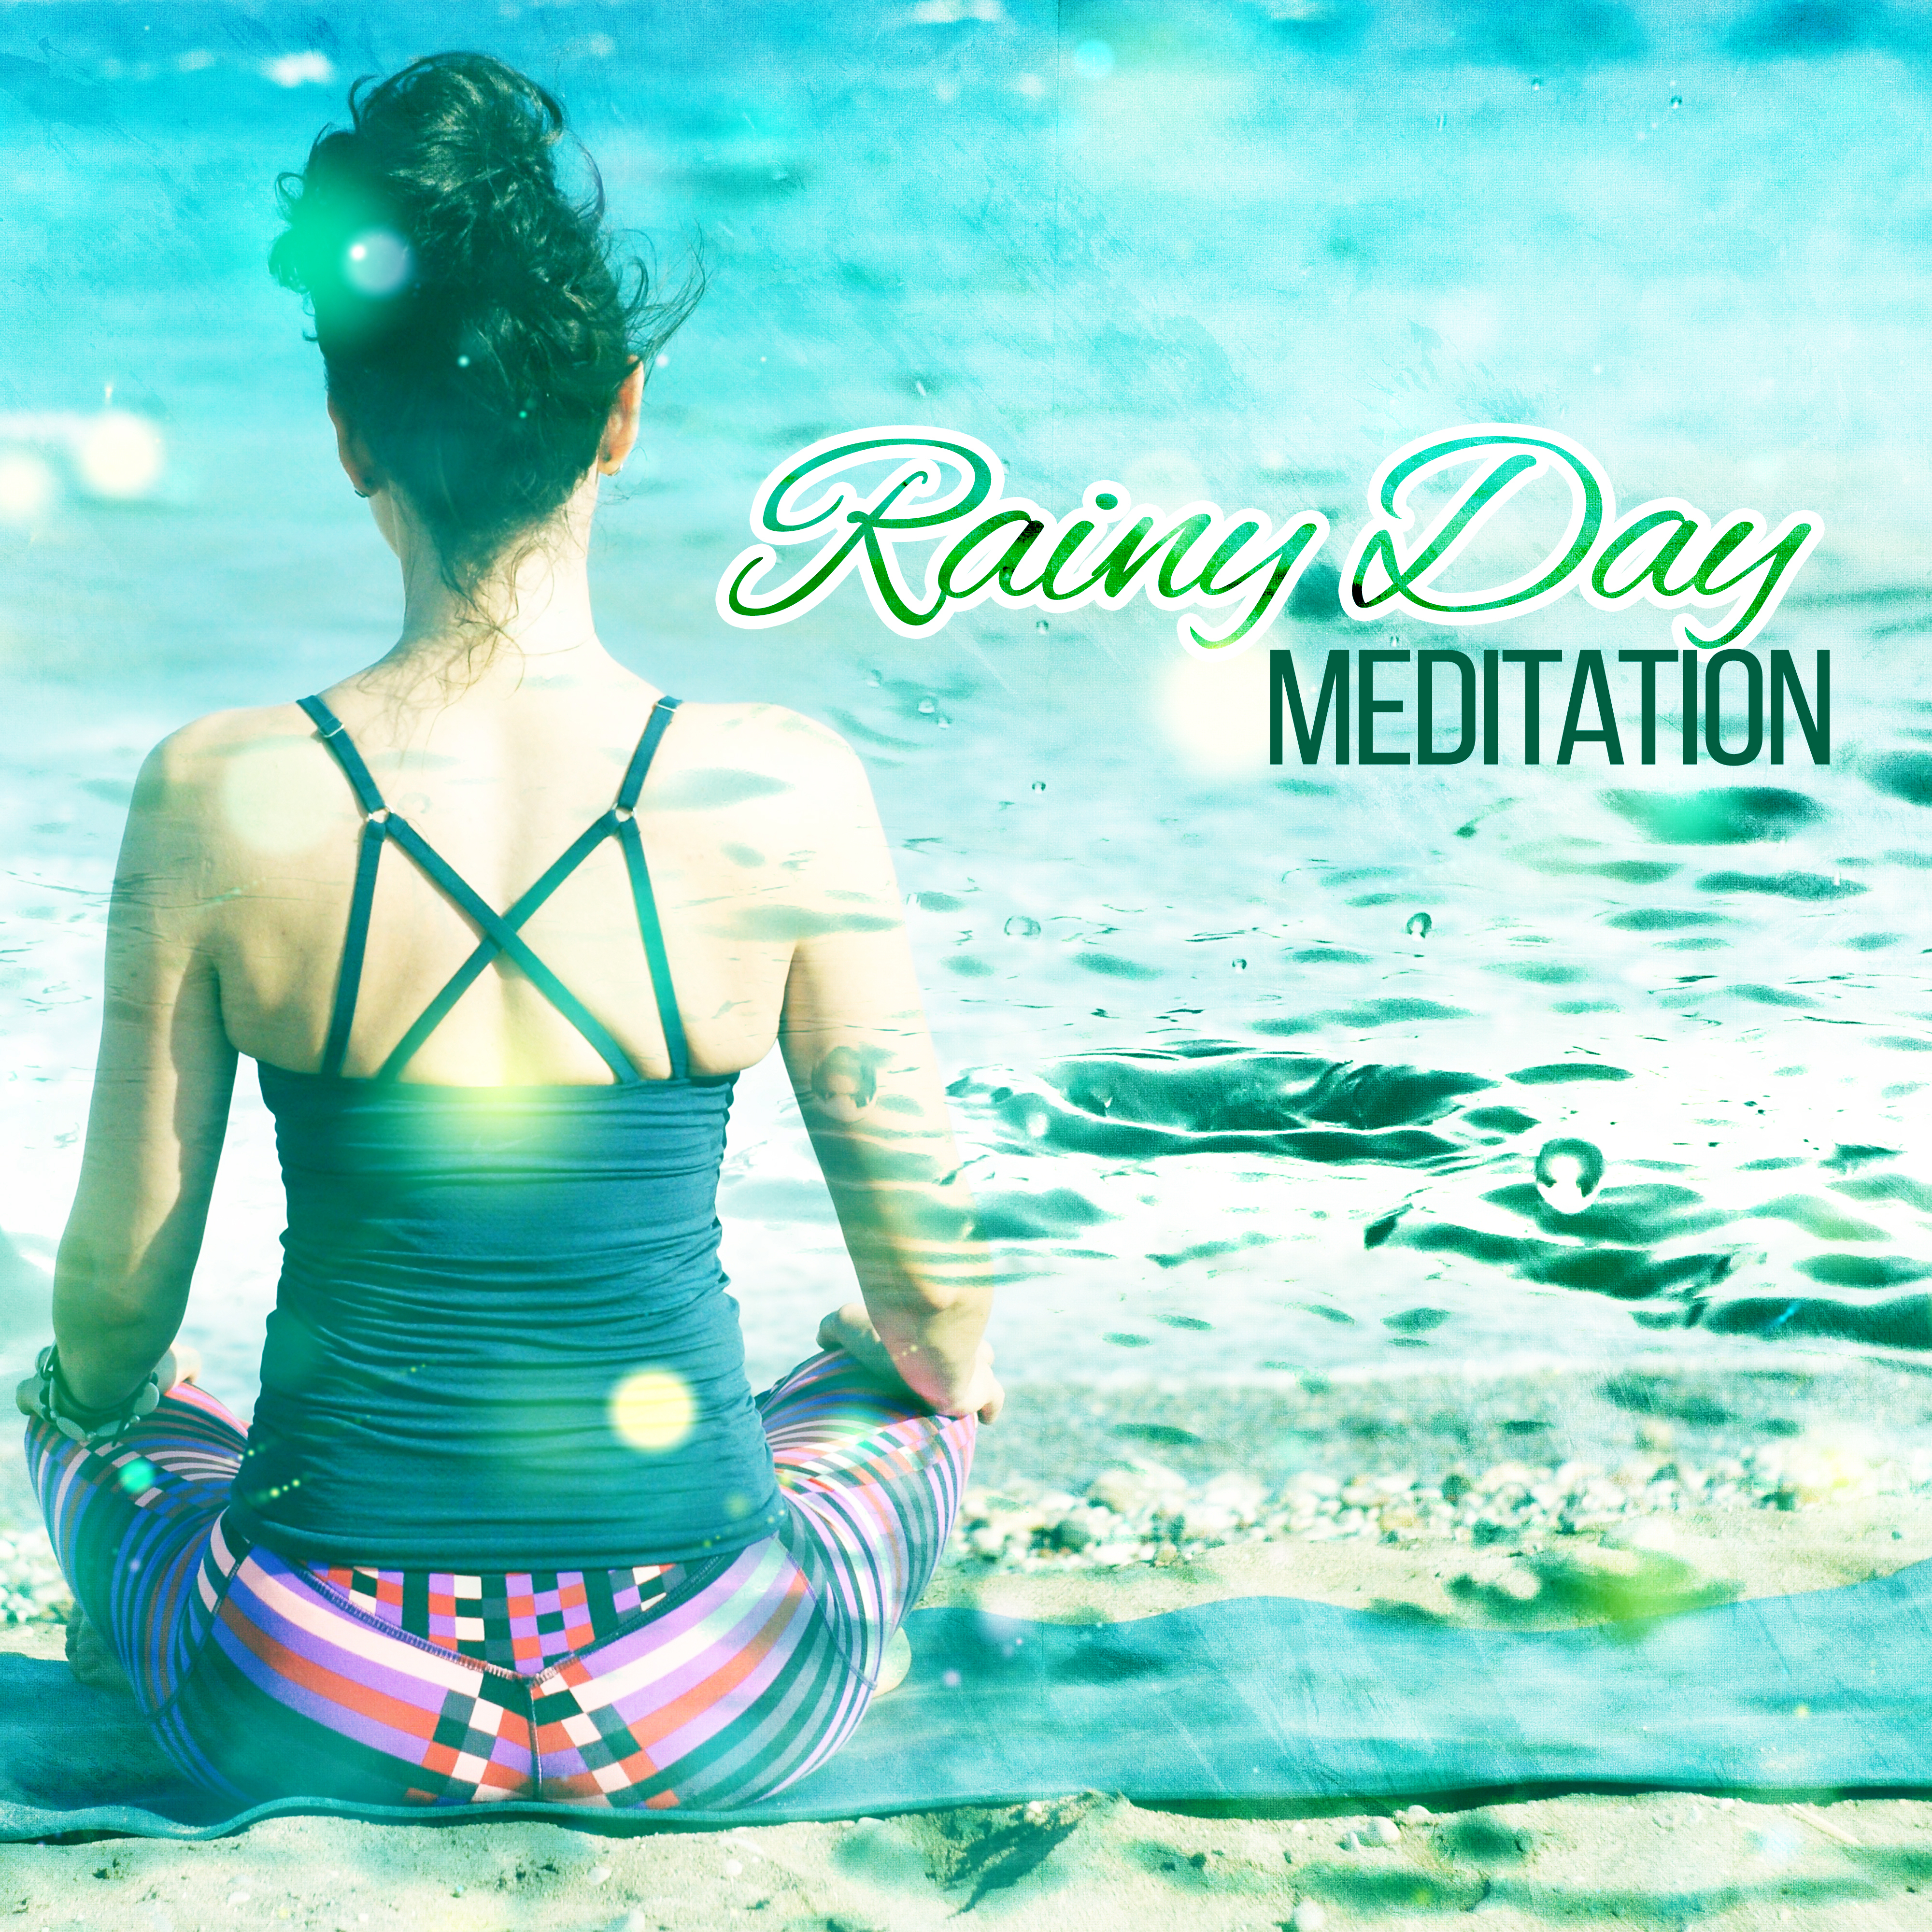 Rainy Day Meditation – New Age Music for Meditation at Home, Relax, Rest, Gorgeous Sounds of Nature